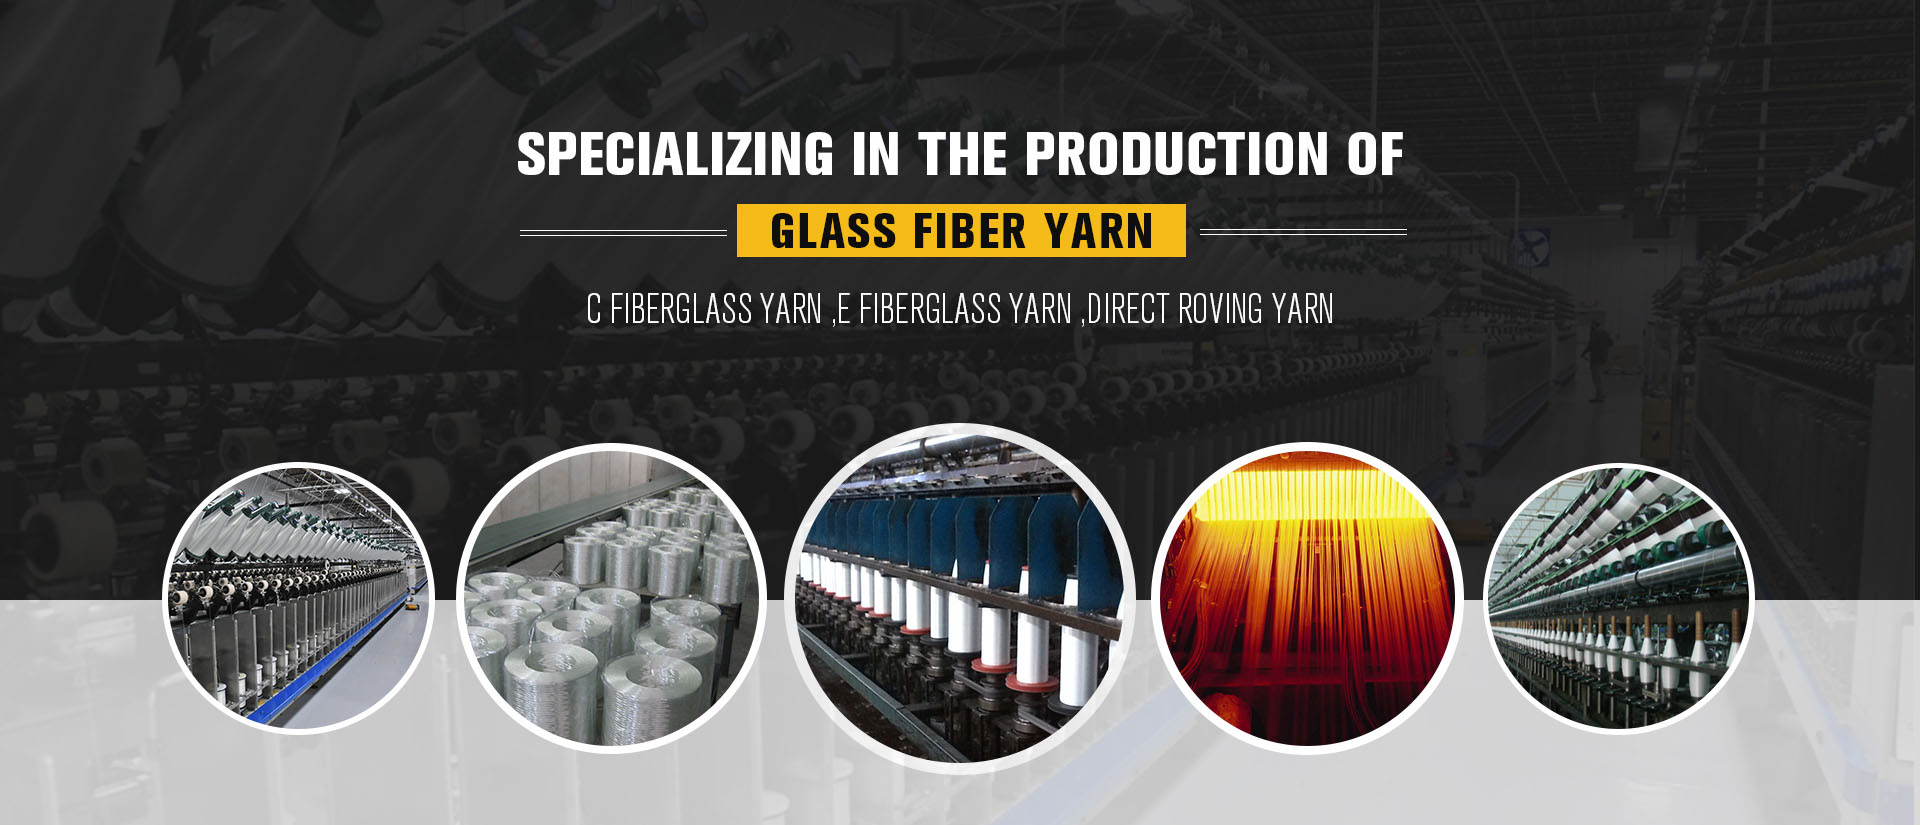 specializing in the production of glass fiber yarn